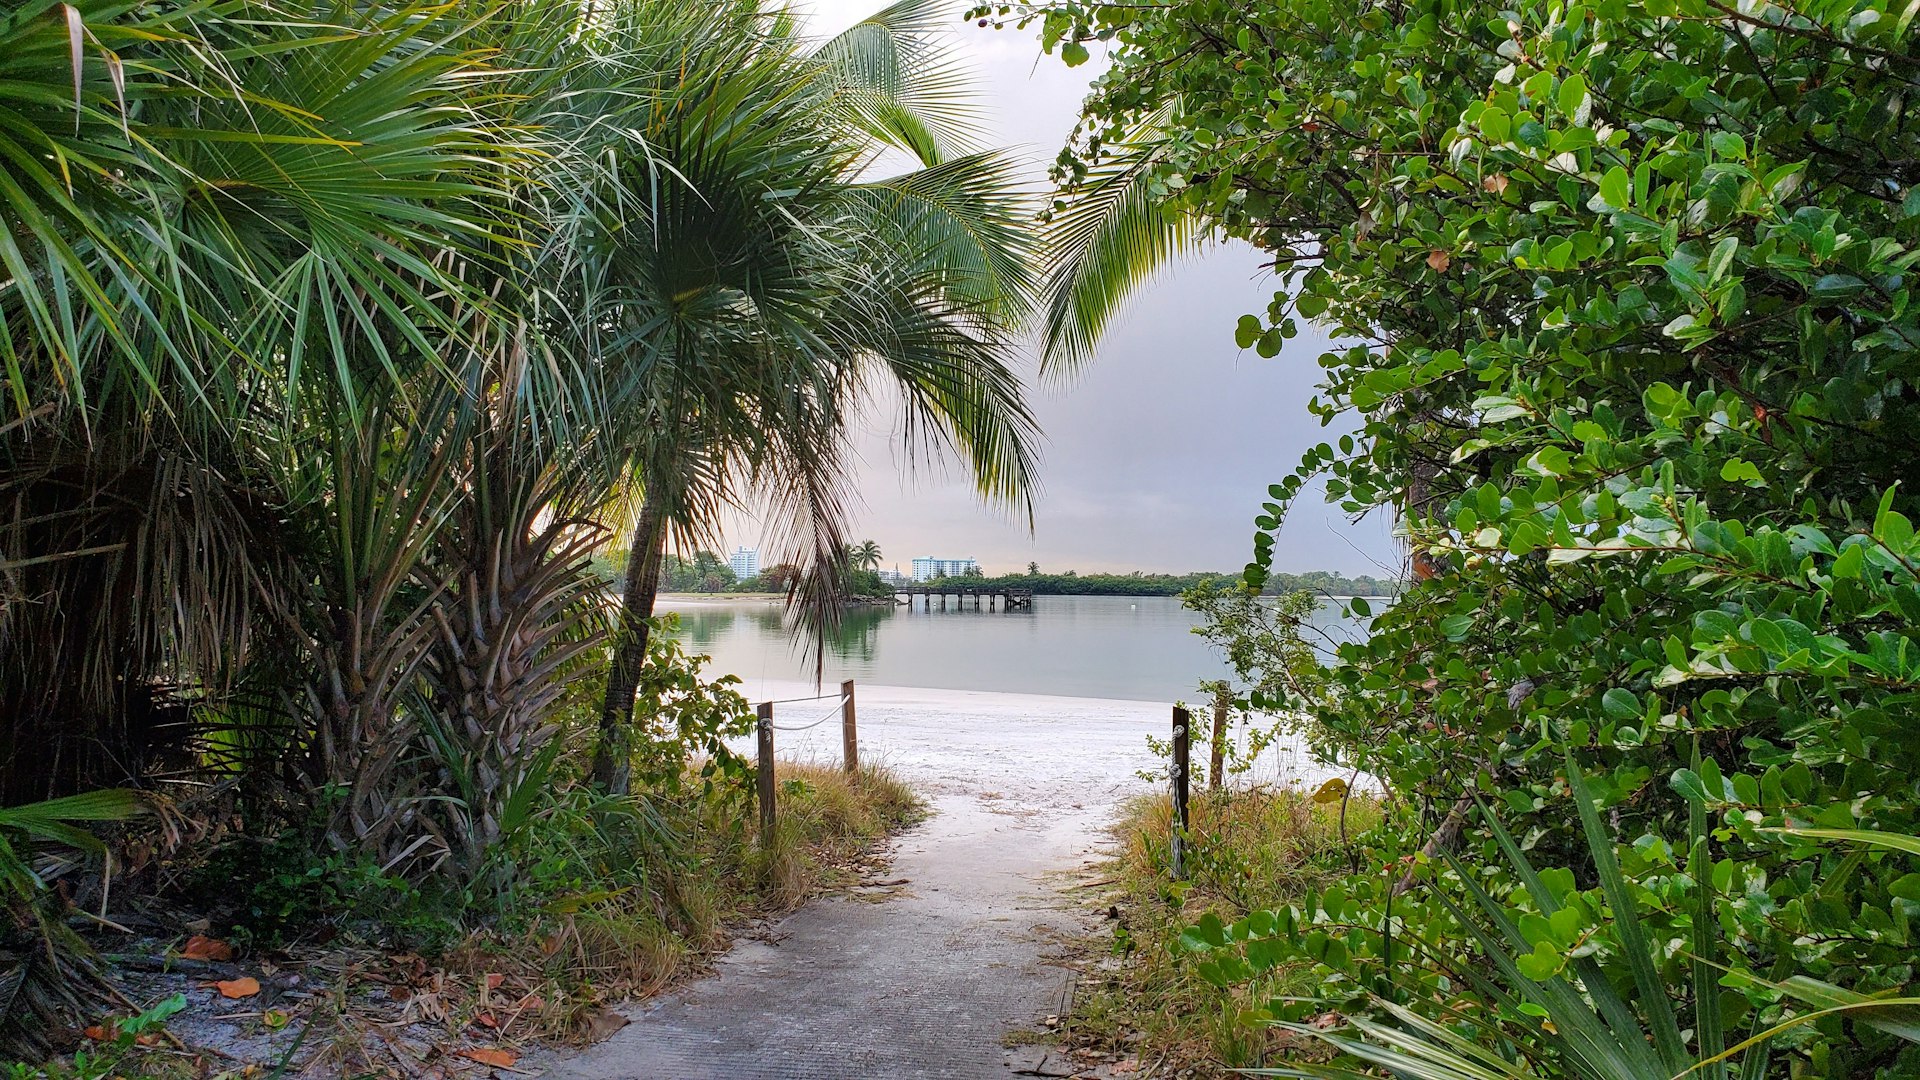 A tree-covered entrance to a beach